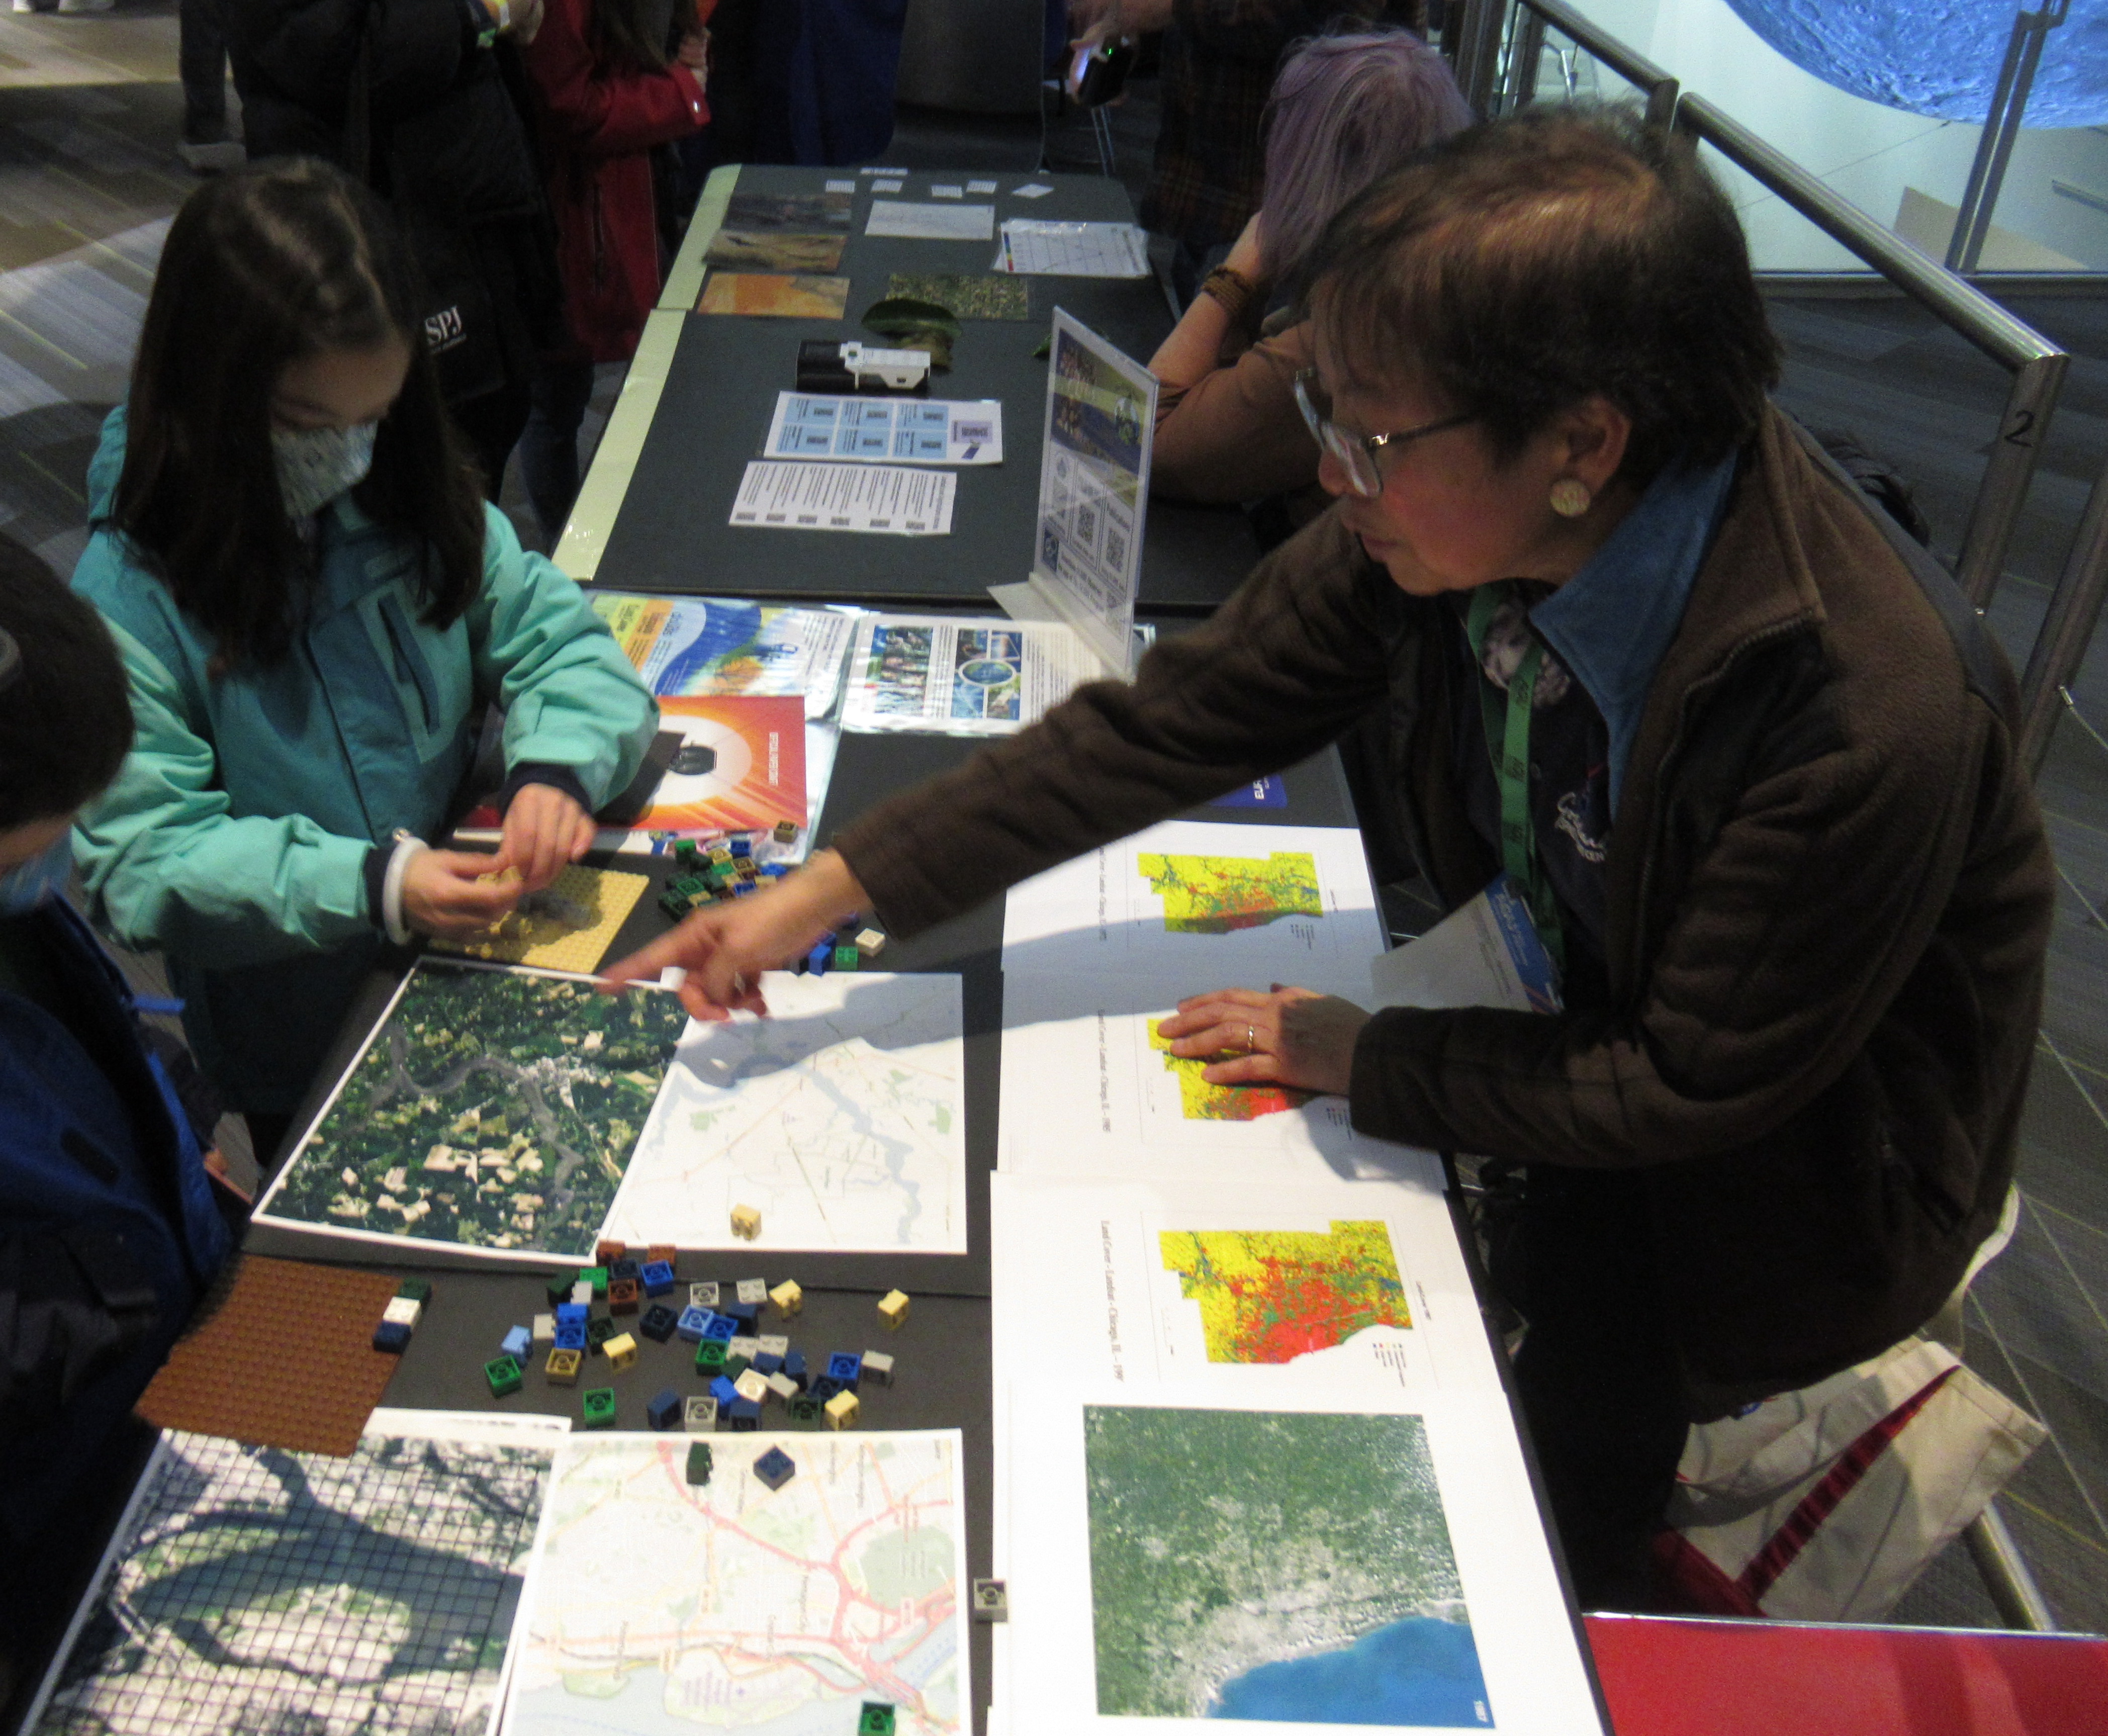 A woman points at a satellite image of the Earth from the Landsat satellite, explaining how the information in the image can be translated into land cover classifications, as demonstrated with LEGO blocks also on the table.